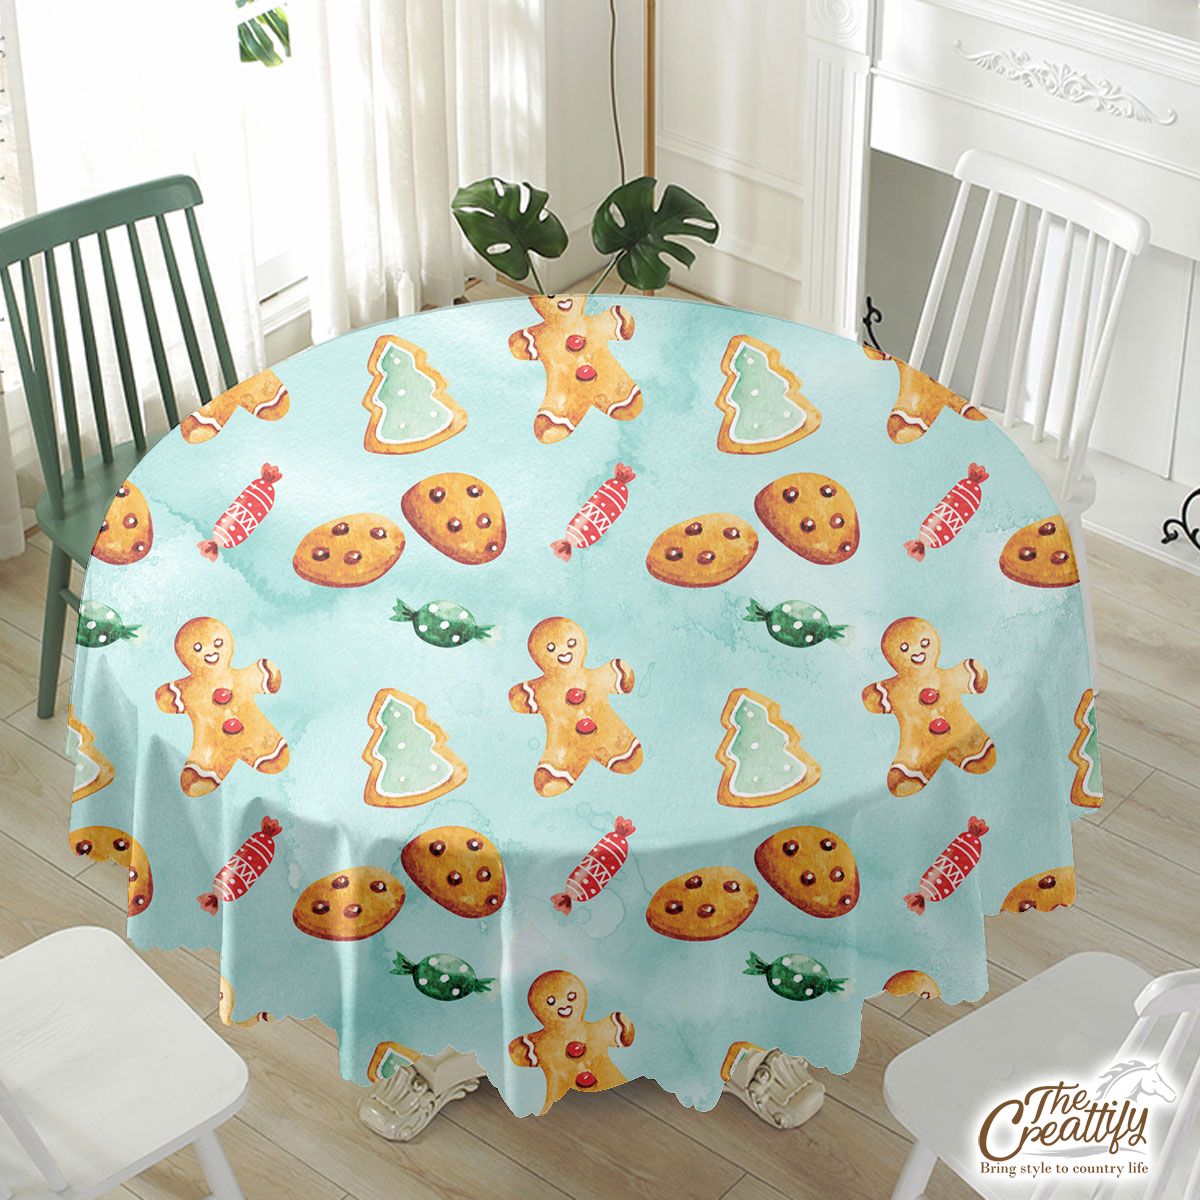 Gingerbread, Christmas Candy, Gingerbread Man Cookies Waterproof Tablecloth